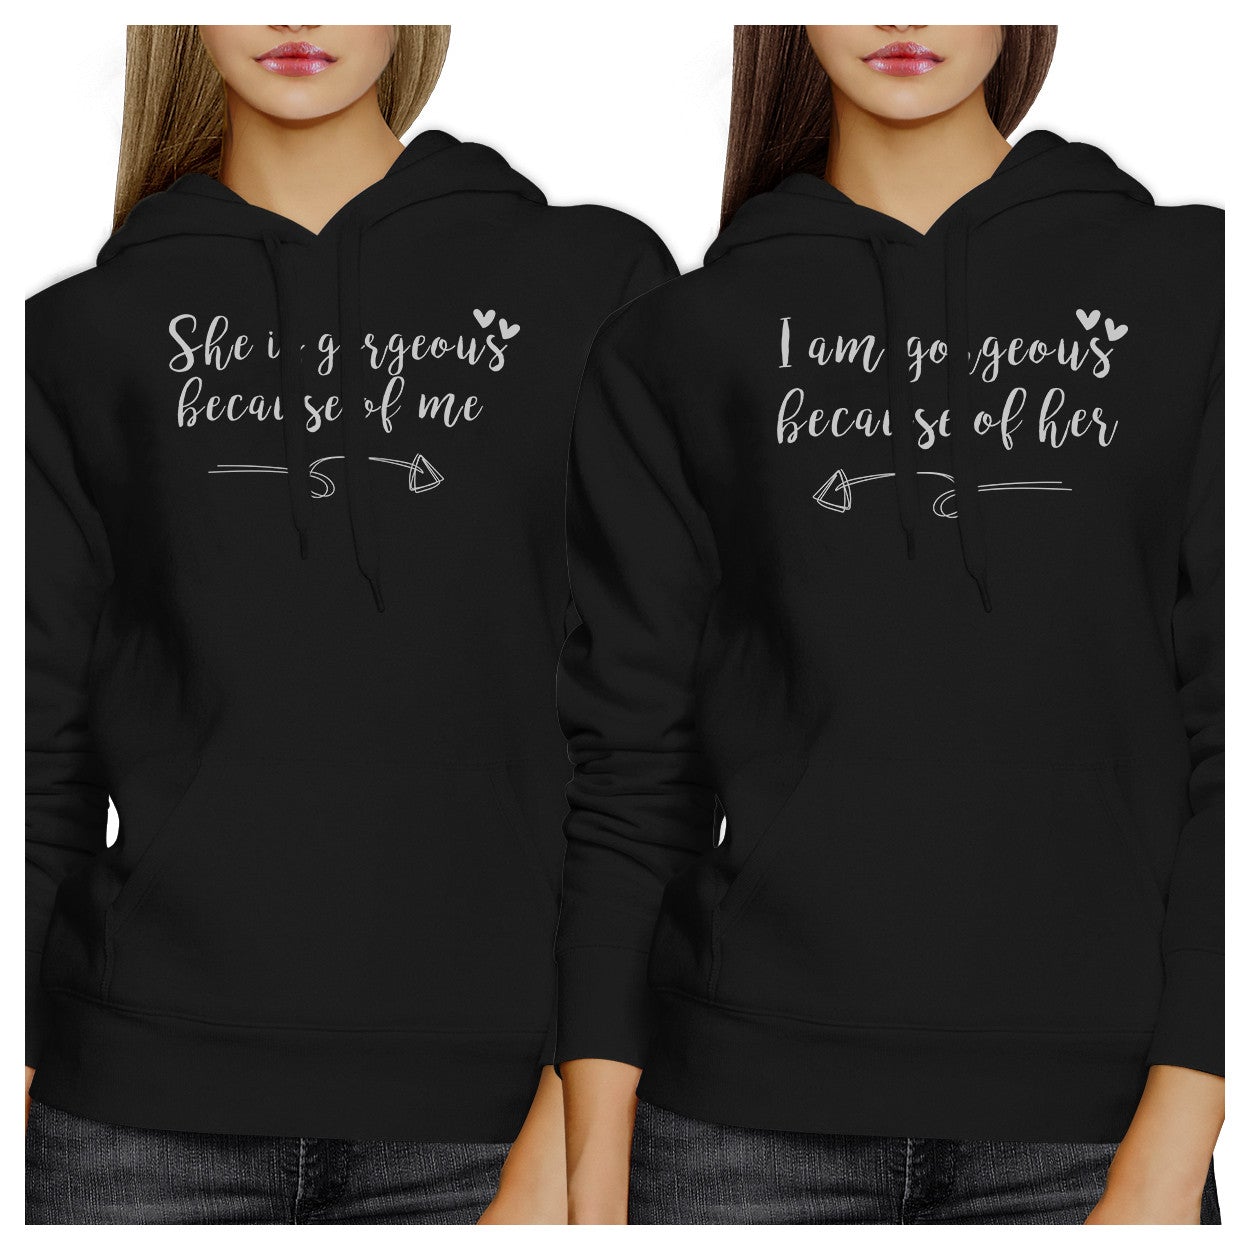 Bae And Owner Of Bae Funny Matching Black Hoodies For Couples Gifts 